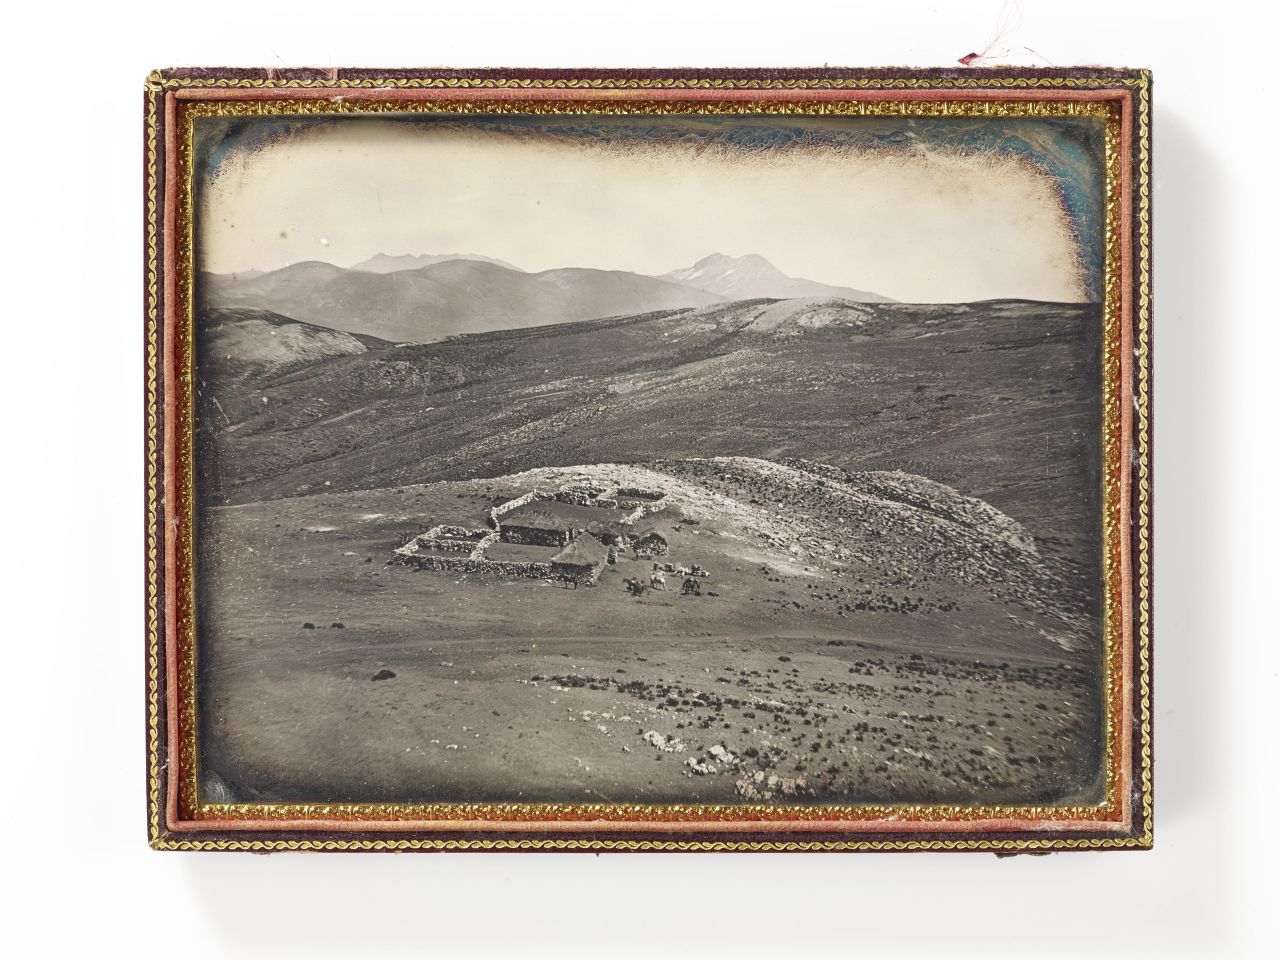 One of the earliest known photographs from South America.